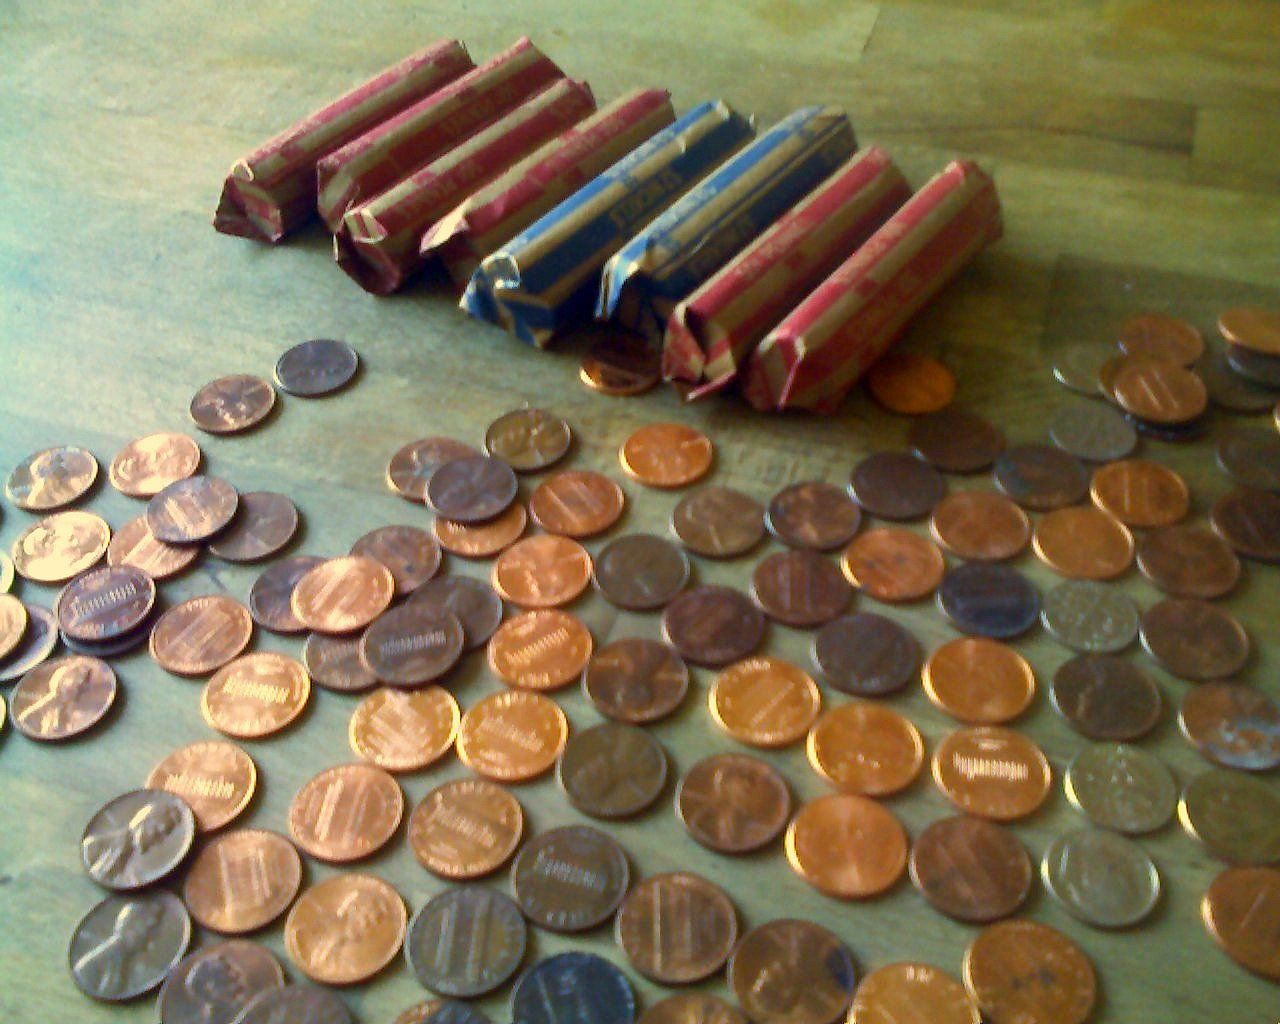 Rolle of Coins